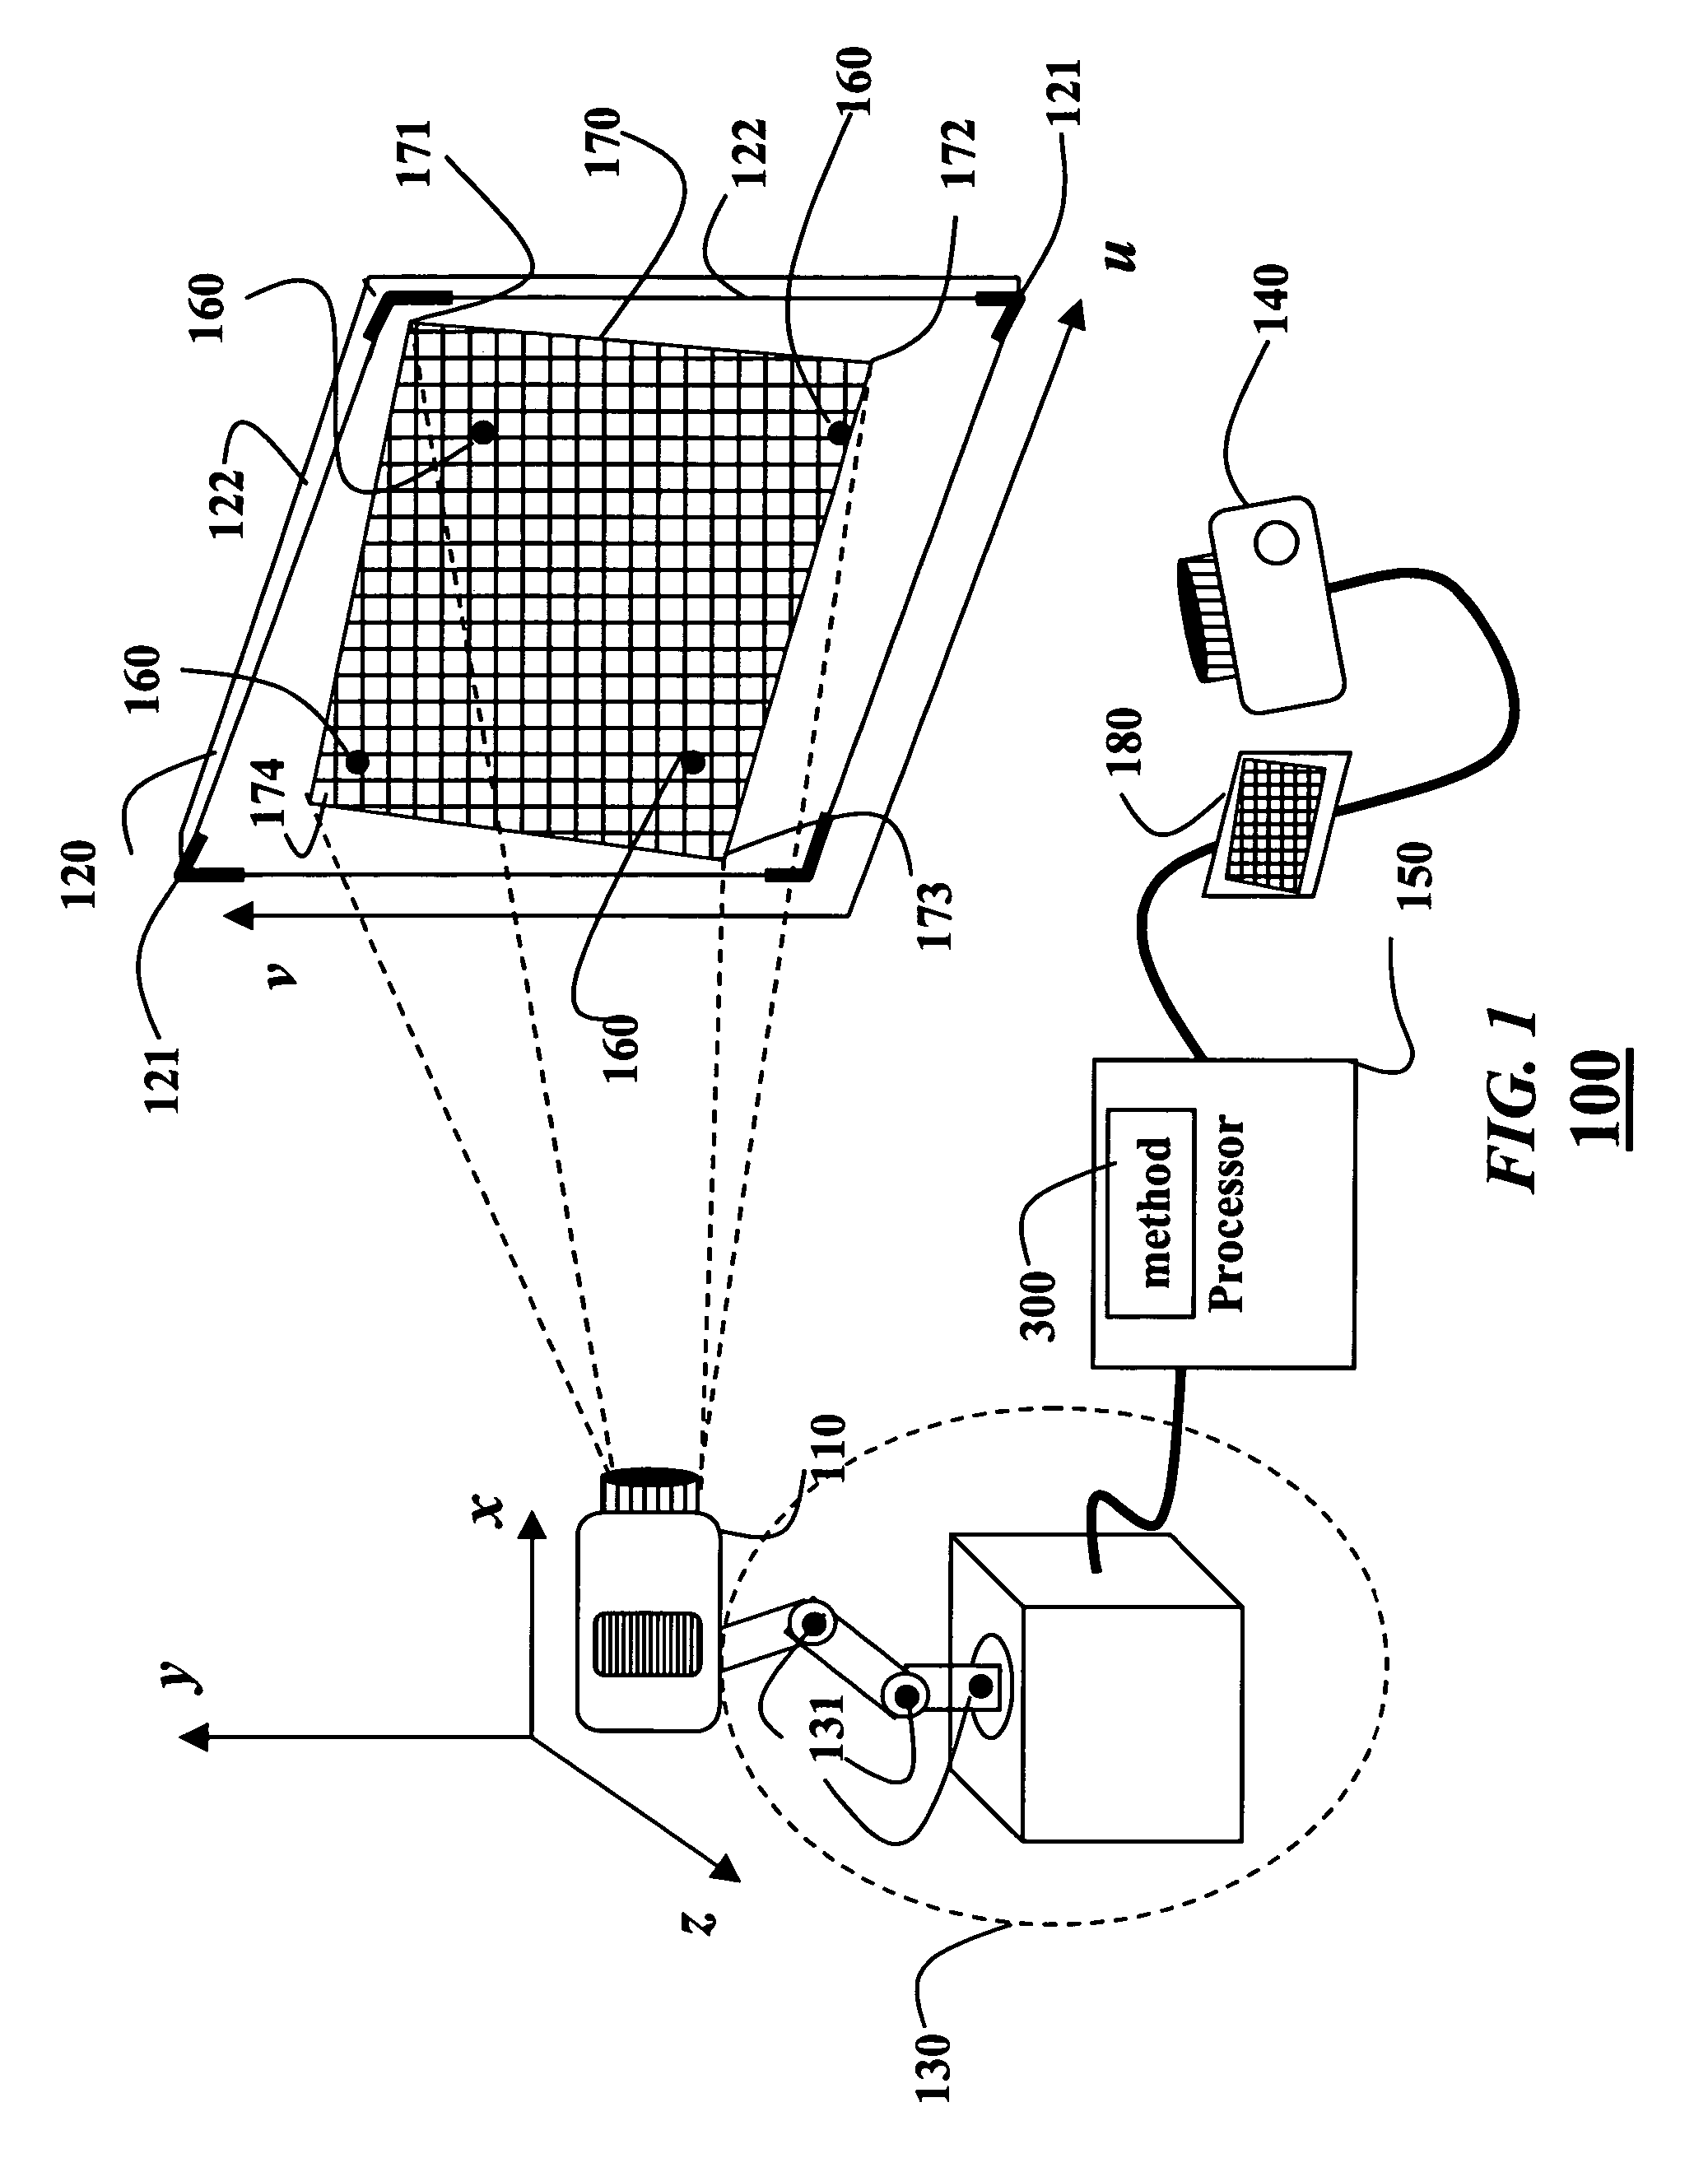 System and method for mechanically adjusting projector pose with six degrees of freedom for image alignment